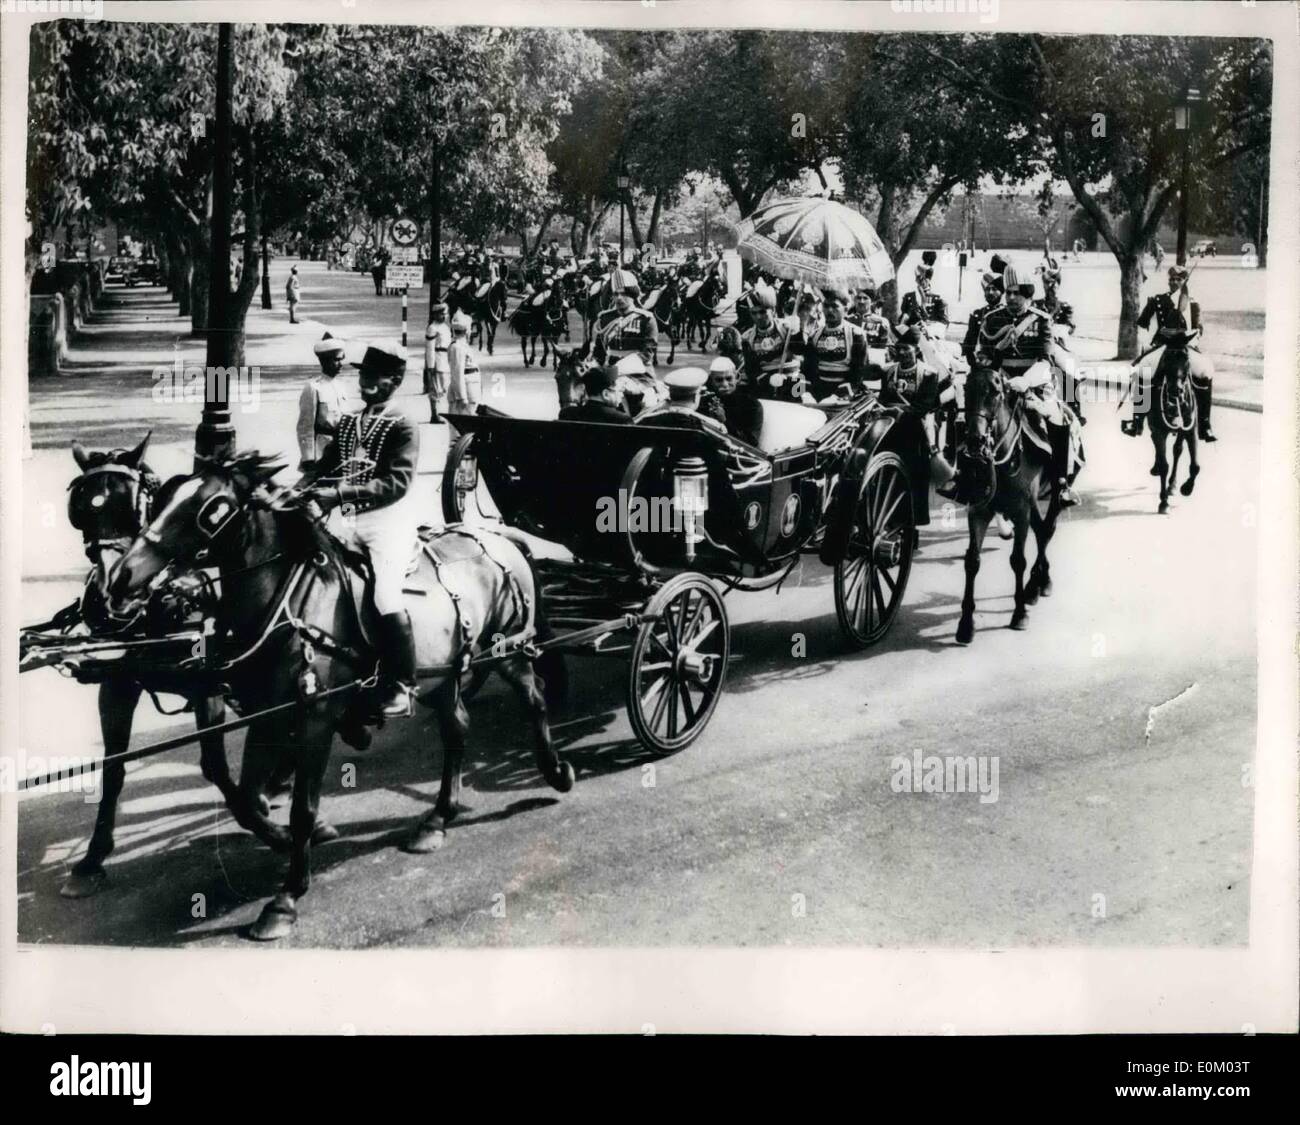 Feb. 02, 1953 - President Of India Opens Parliament. Photo shows The scene as the President of India, Dr. Rajendra Prasad arriving in state for the opening of the Third Session of Parliament in New Delhi. Stock Photo